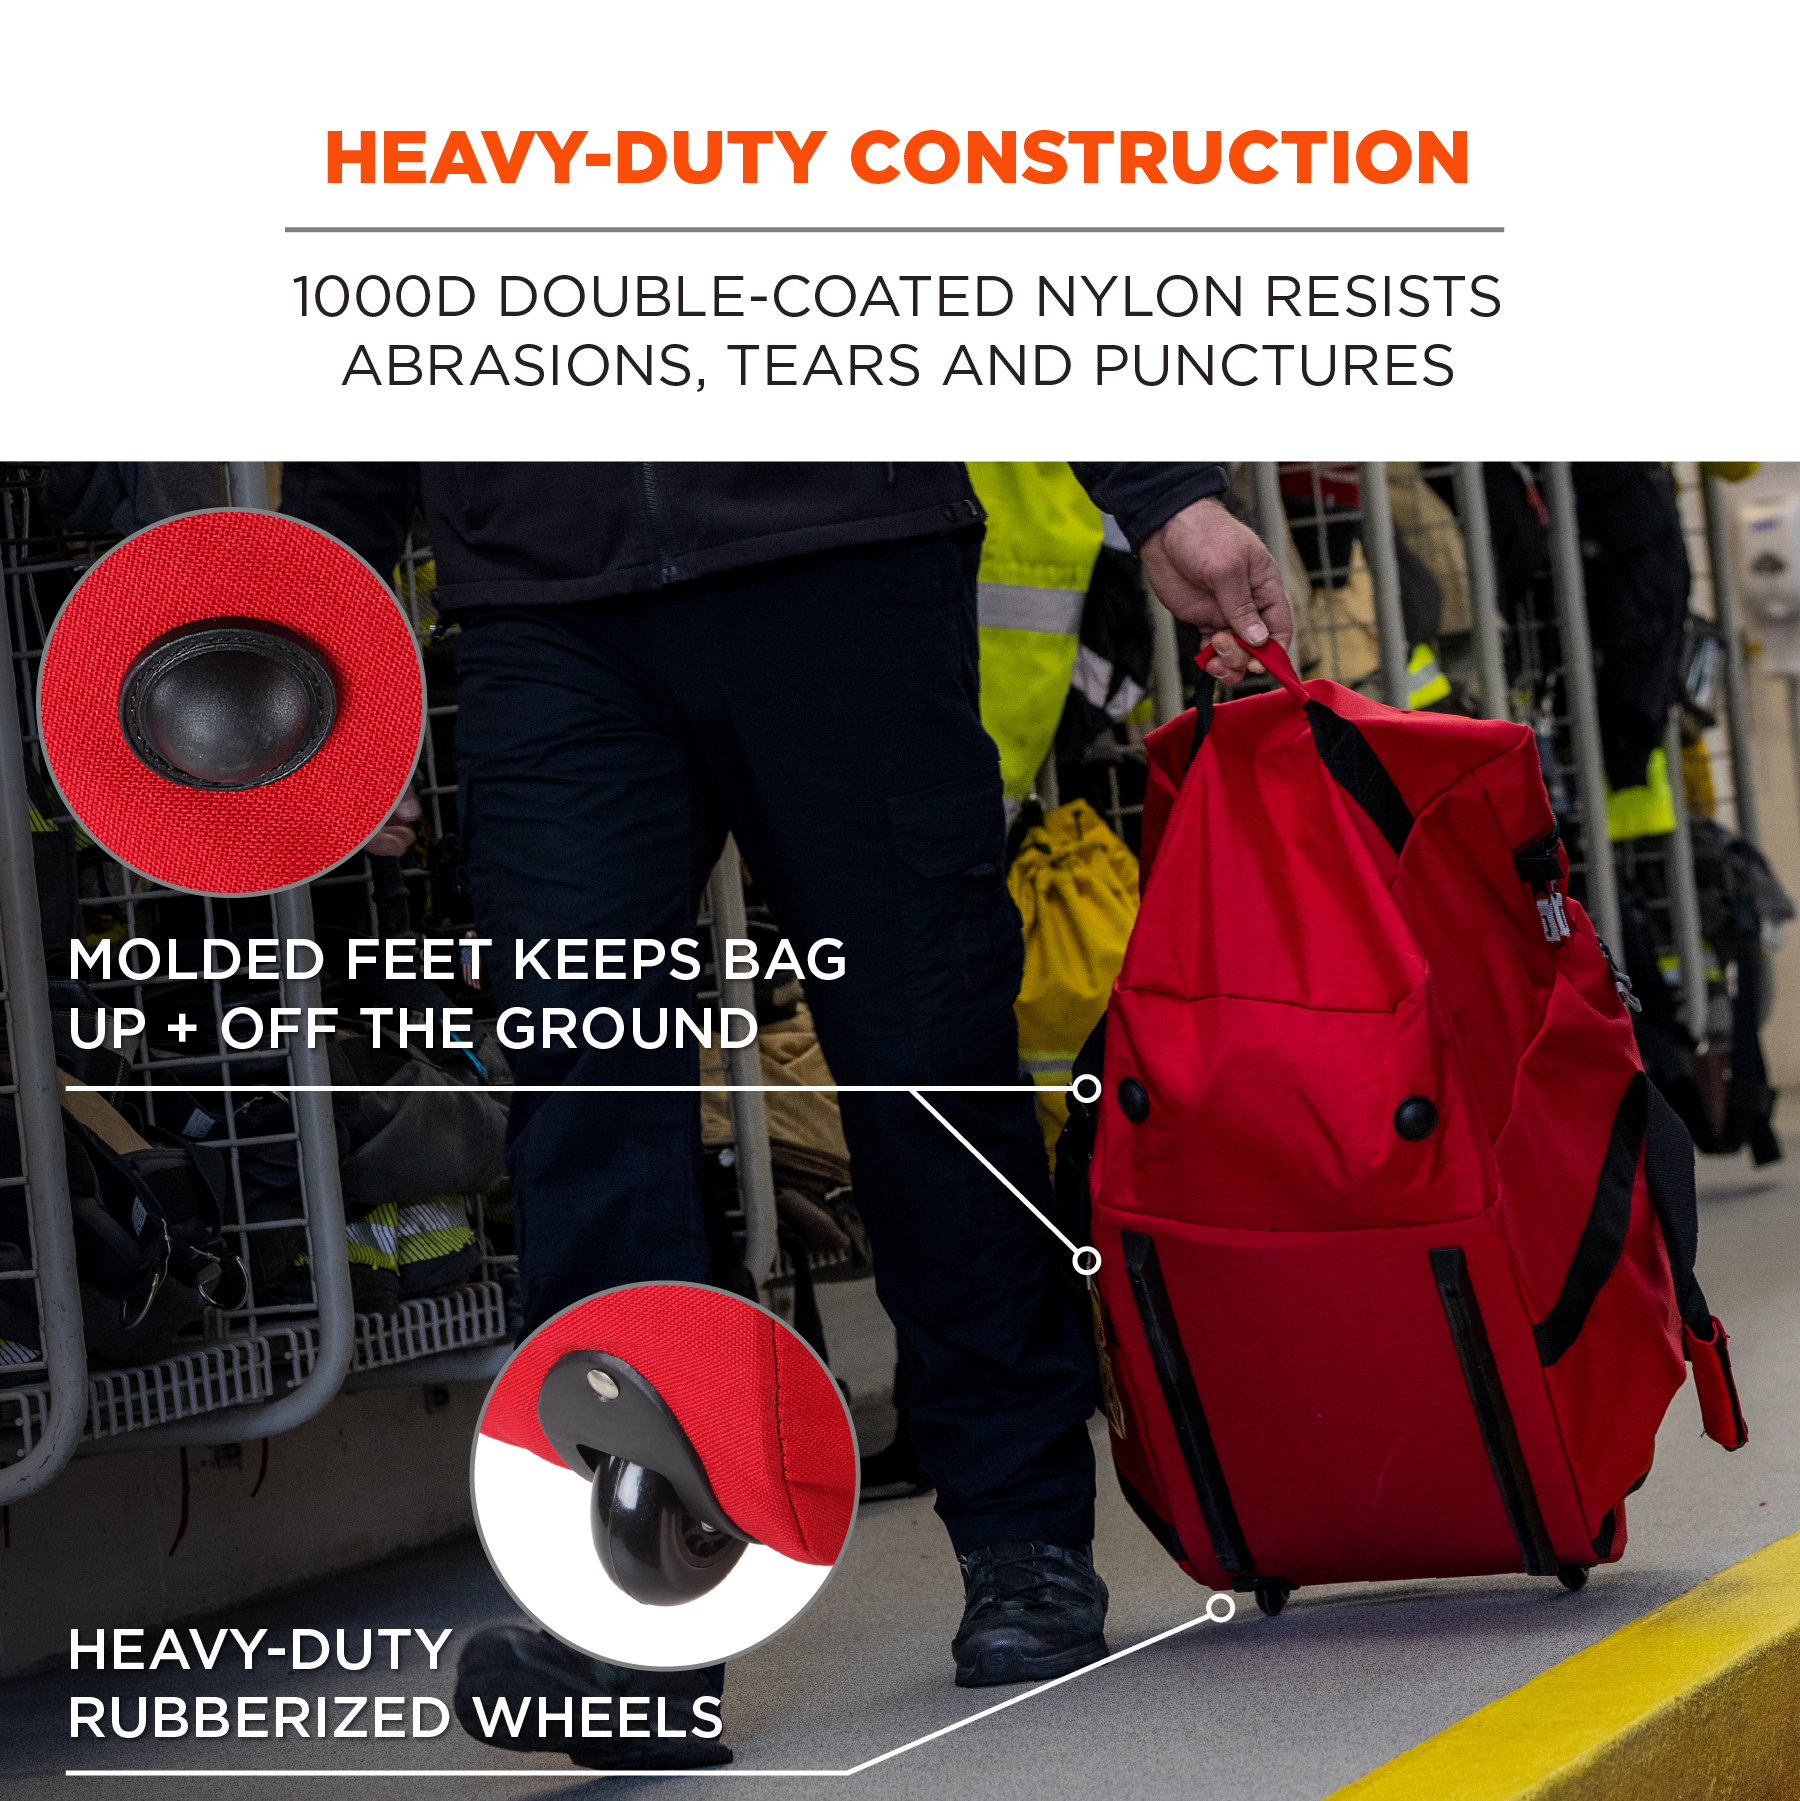 https://www.ergodyne.com/sites/default/files/product-images/13205-5005w-wheeled-firefighter-turnout-bag-red-heavy-duty-construction.jpg